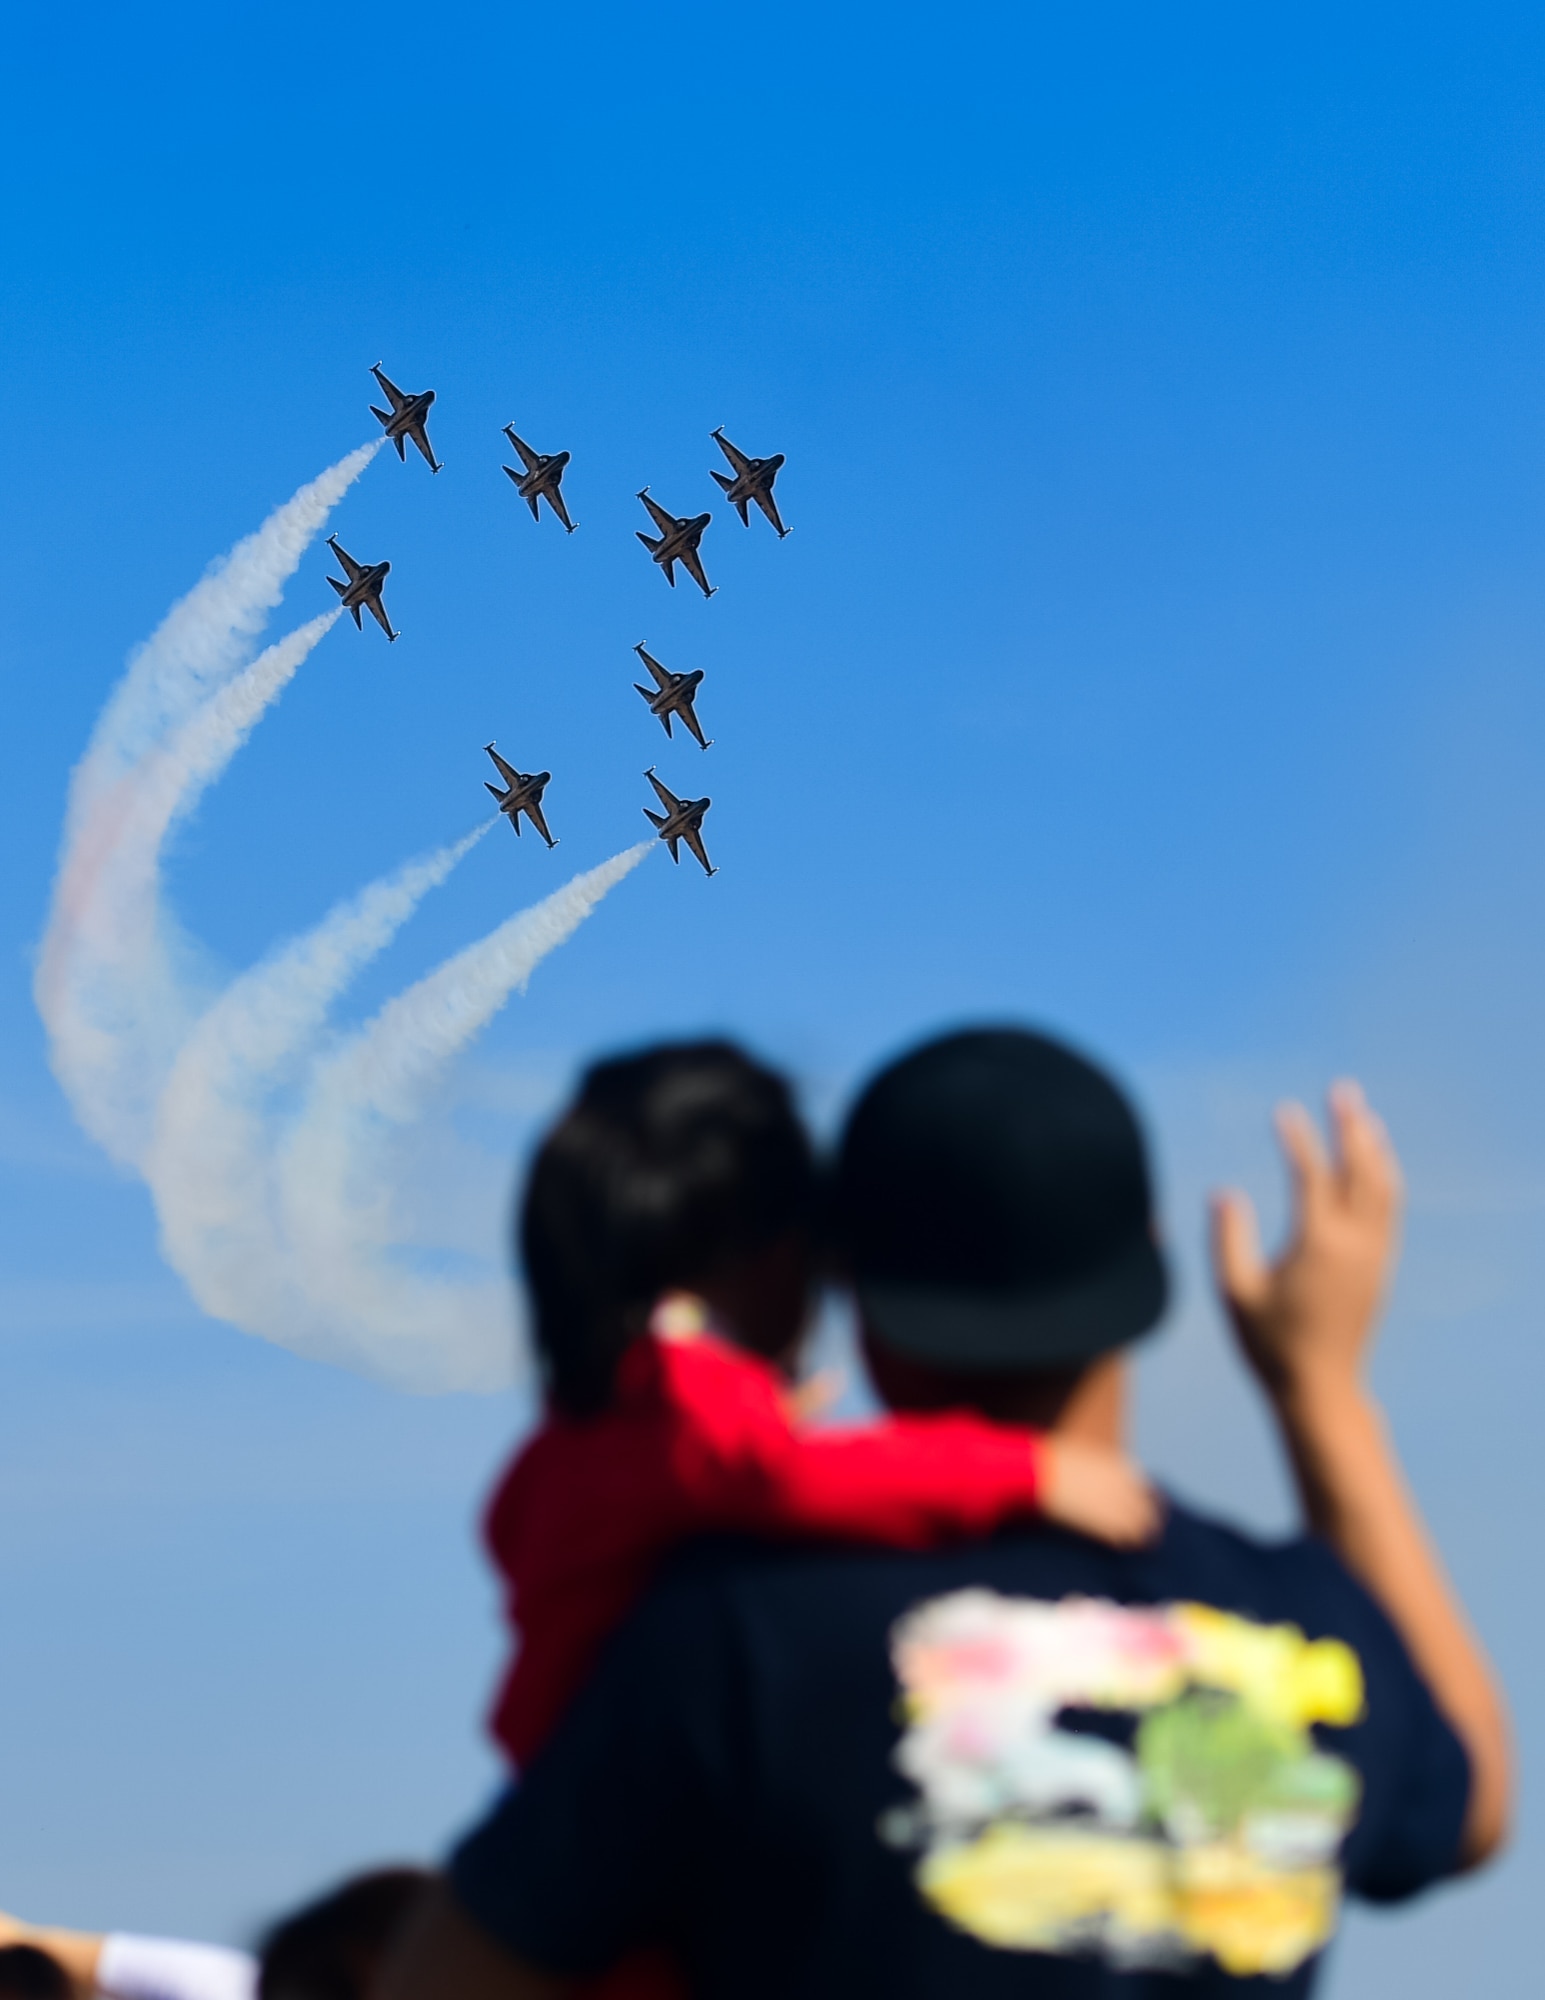 Spectators watch the Republic of Korea’s 53rd Demonstration Group, also known as the Black Eagles, perform at the Gyeongnam Sacheon Aerospace Expo at Sacheon Air Base, South Korea, Oct. 25, 2018.